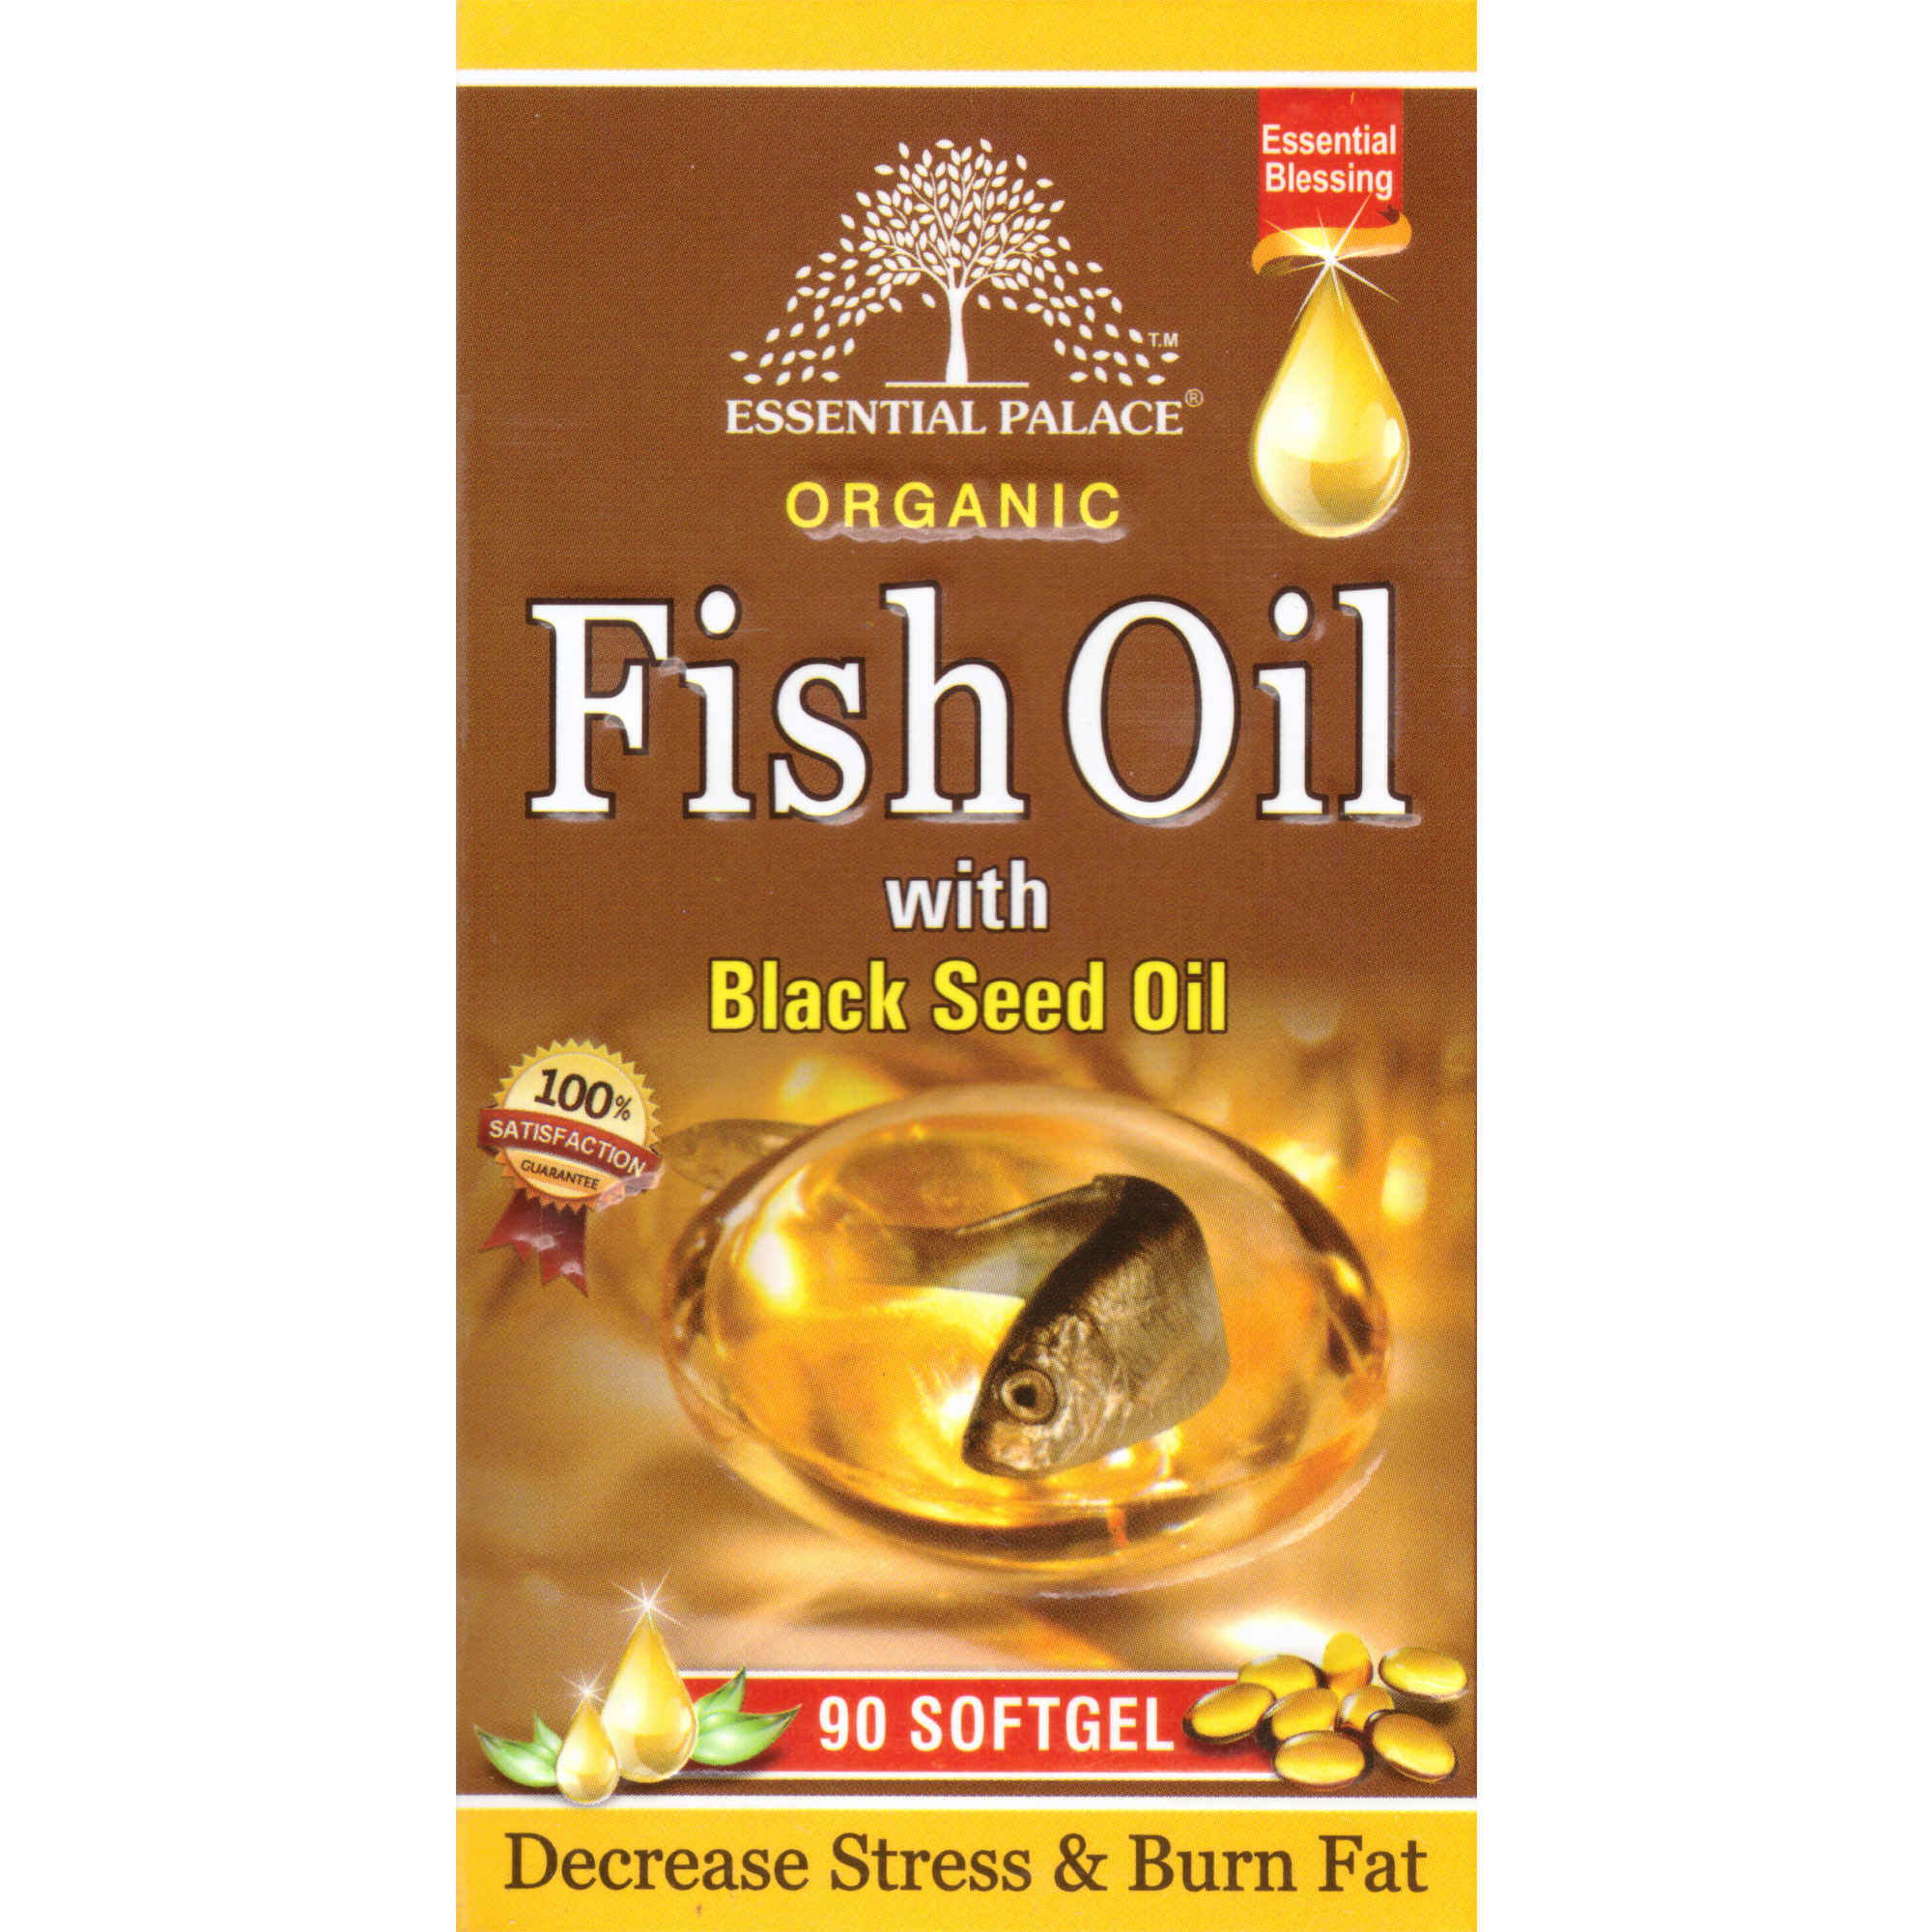 Essential Palace Organic Fish Oil with Black Seed Oil 90 SoftGel Front 2